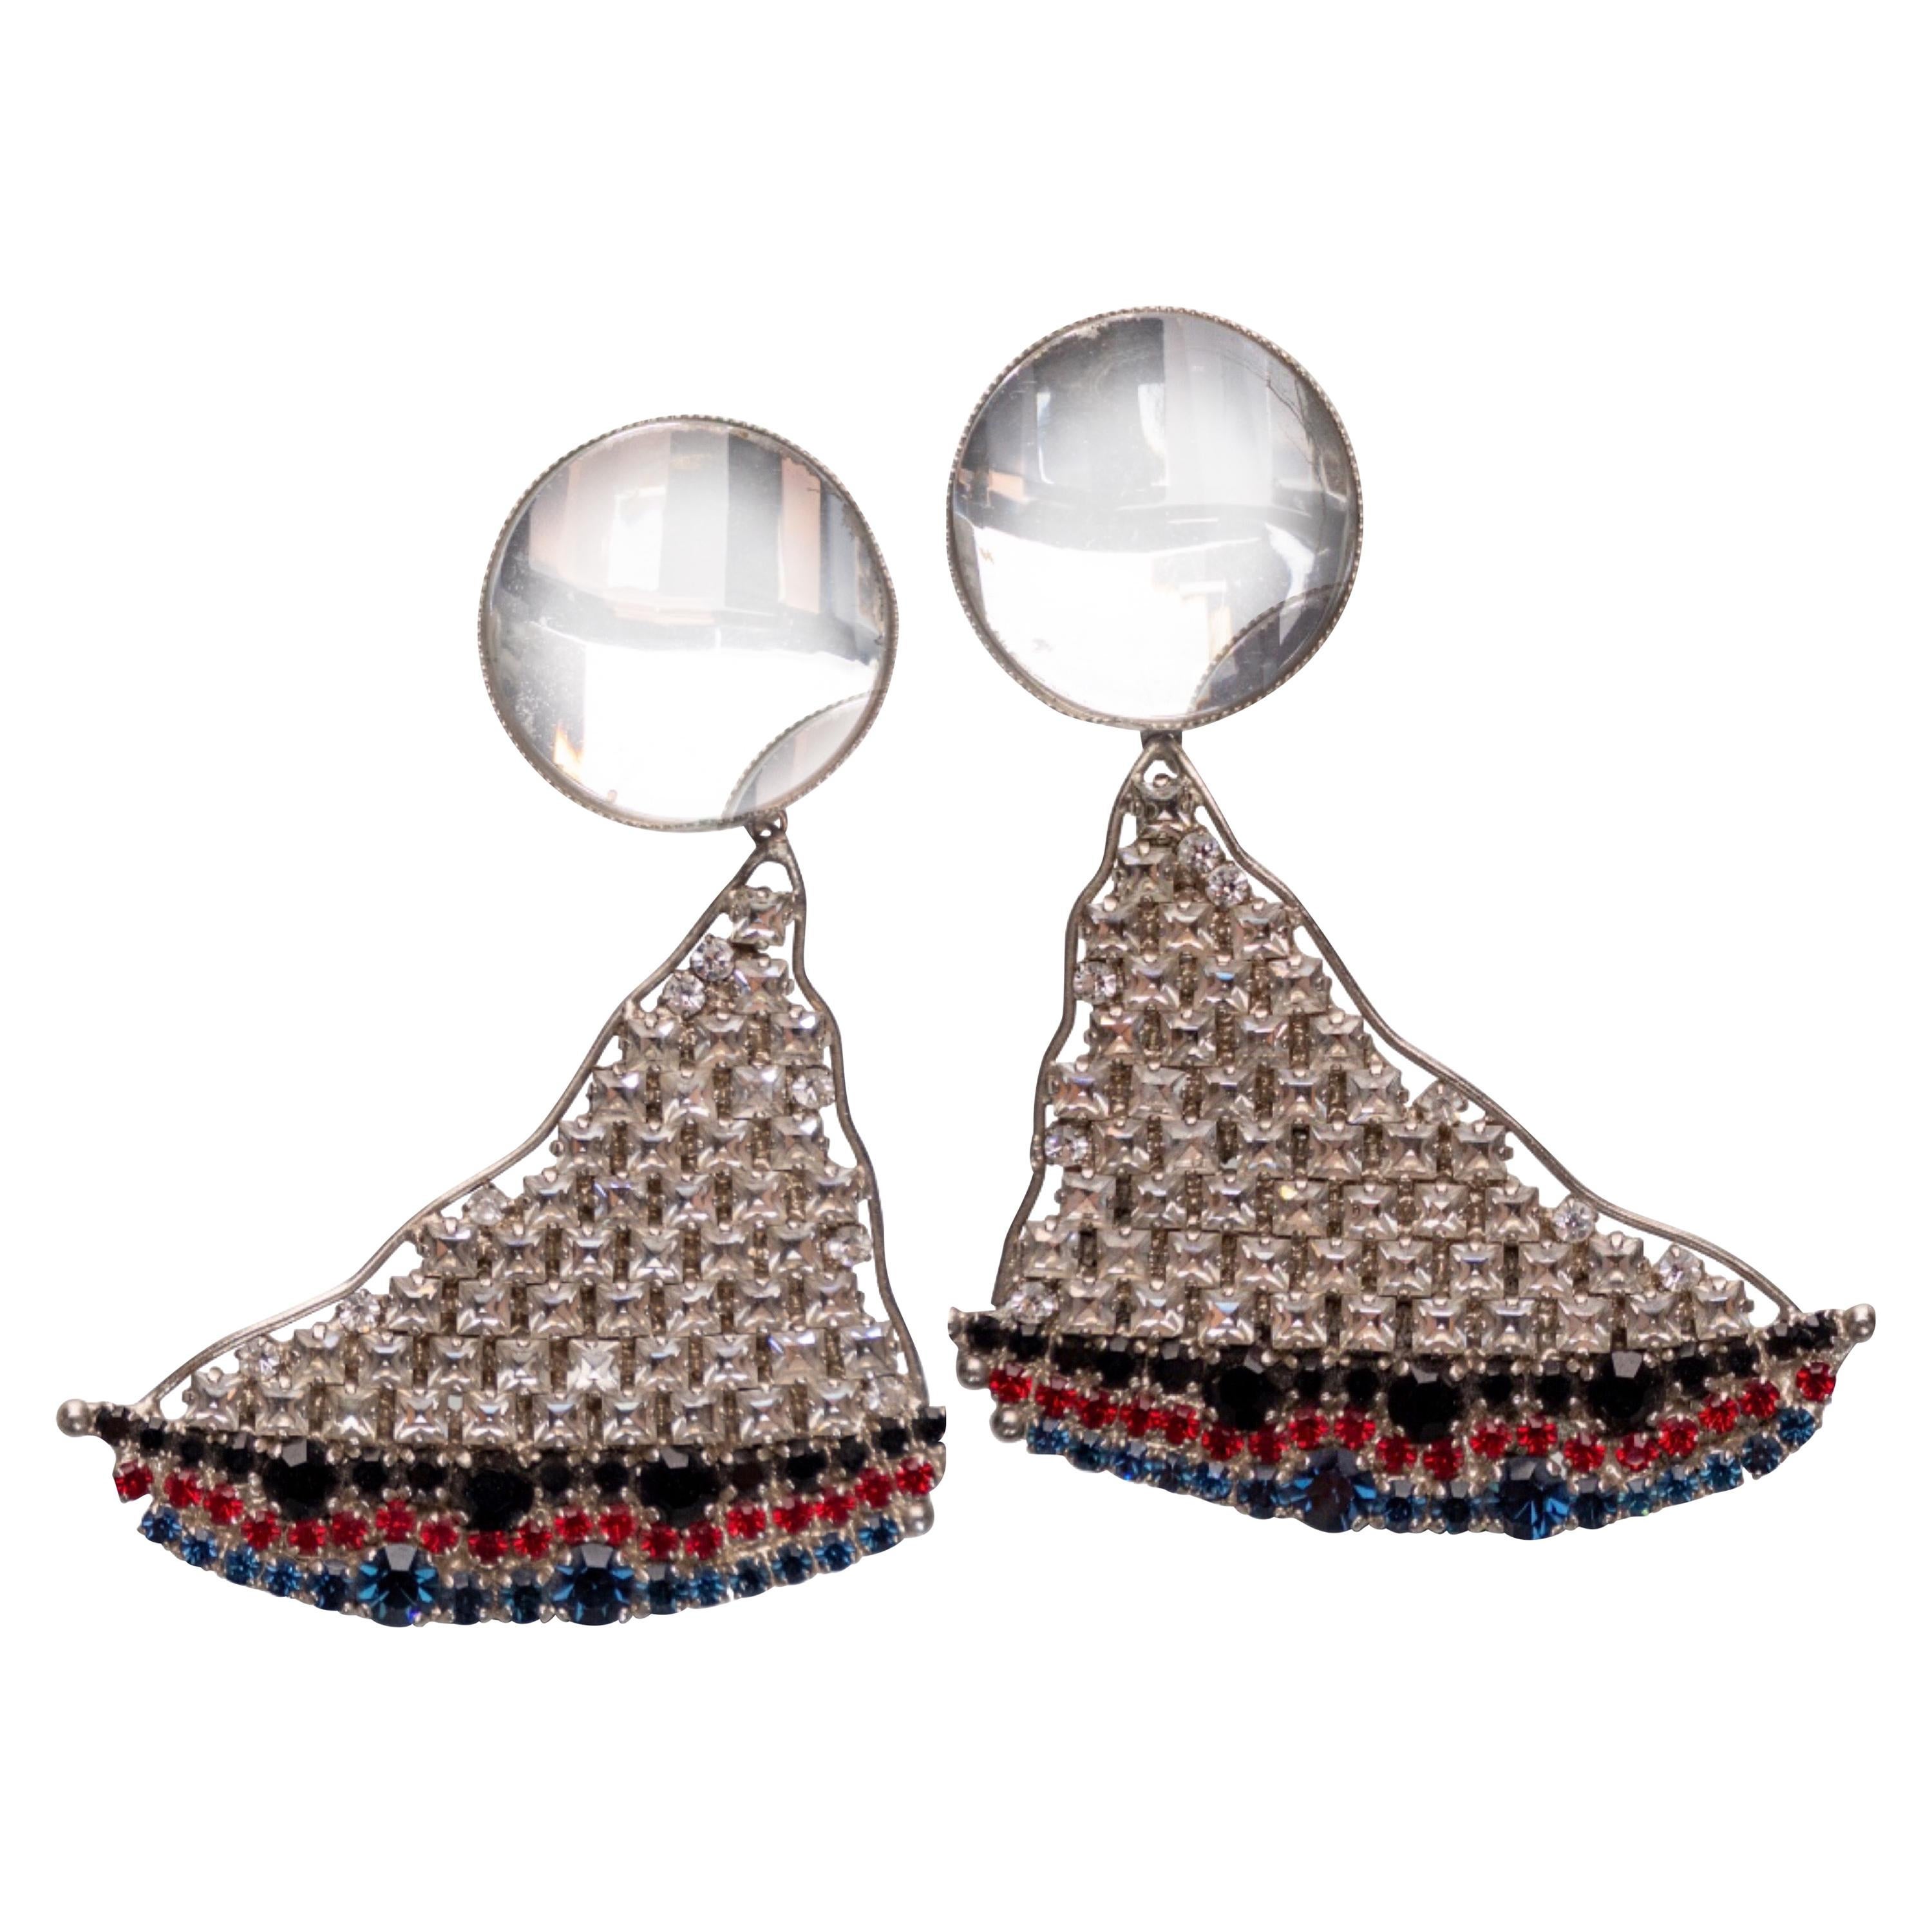 Yves Saint Laurent Crystal Sailboat Earrings Rare Collectors YSL, 1988 For Sale